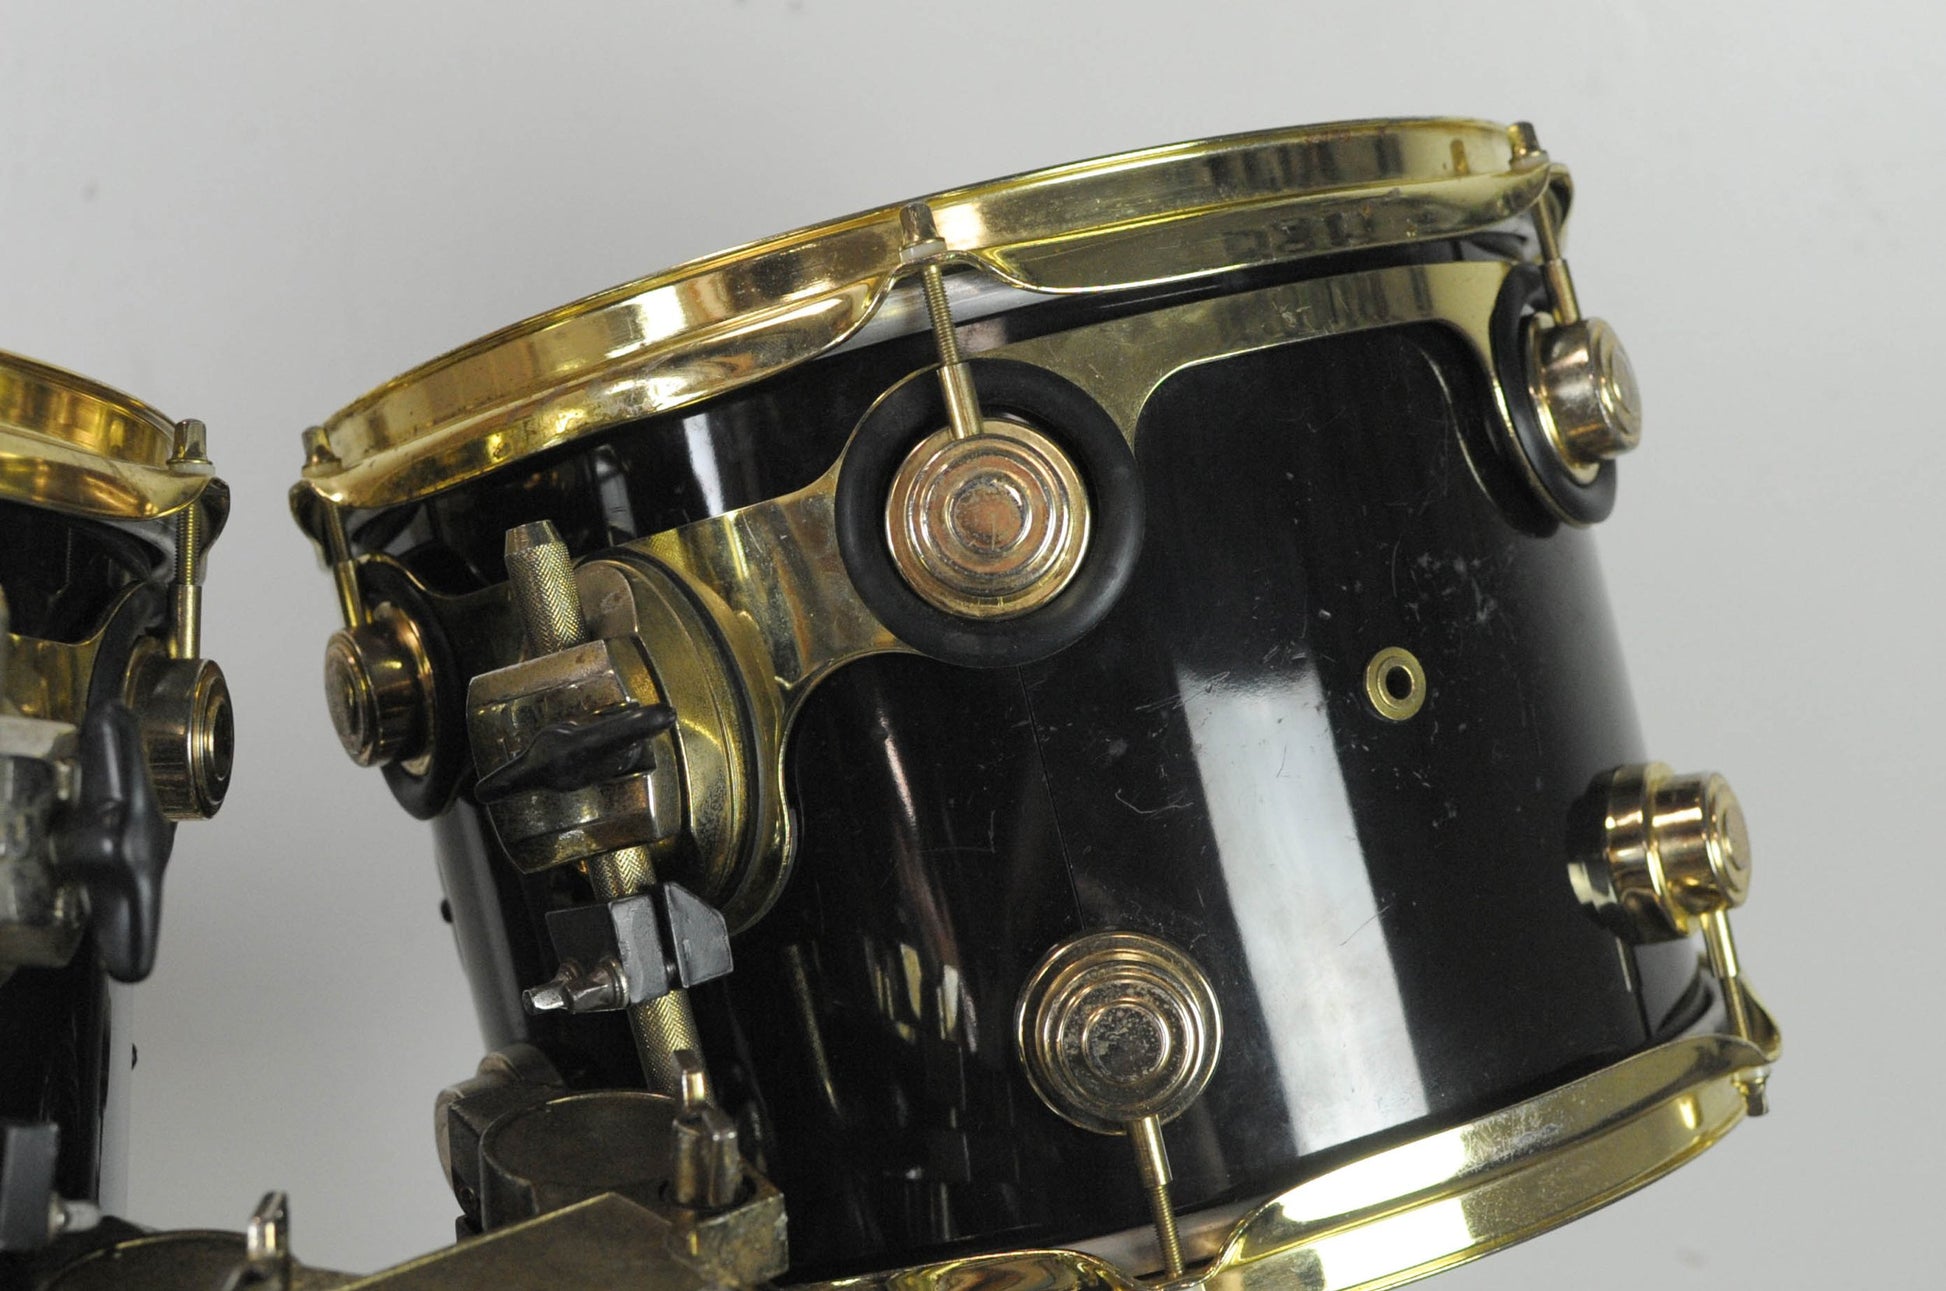 1998 DW "Black and Gold" Drum Set